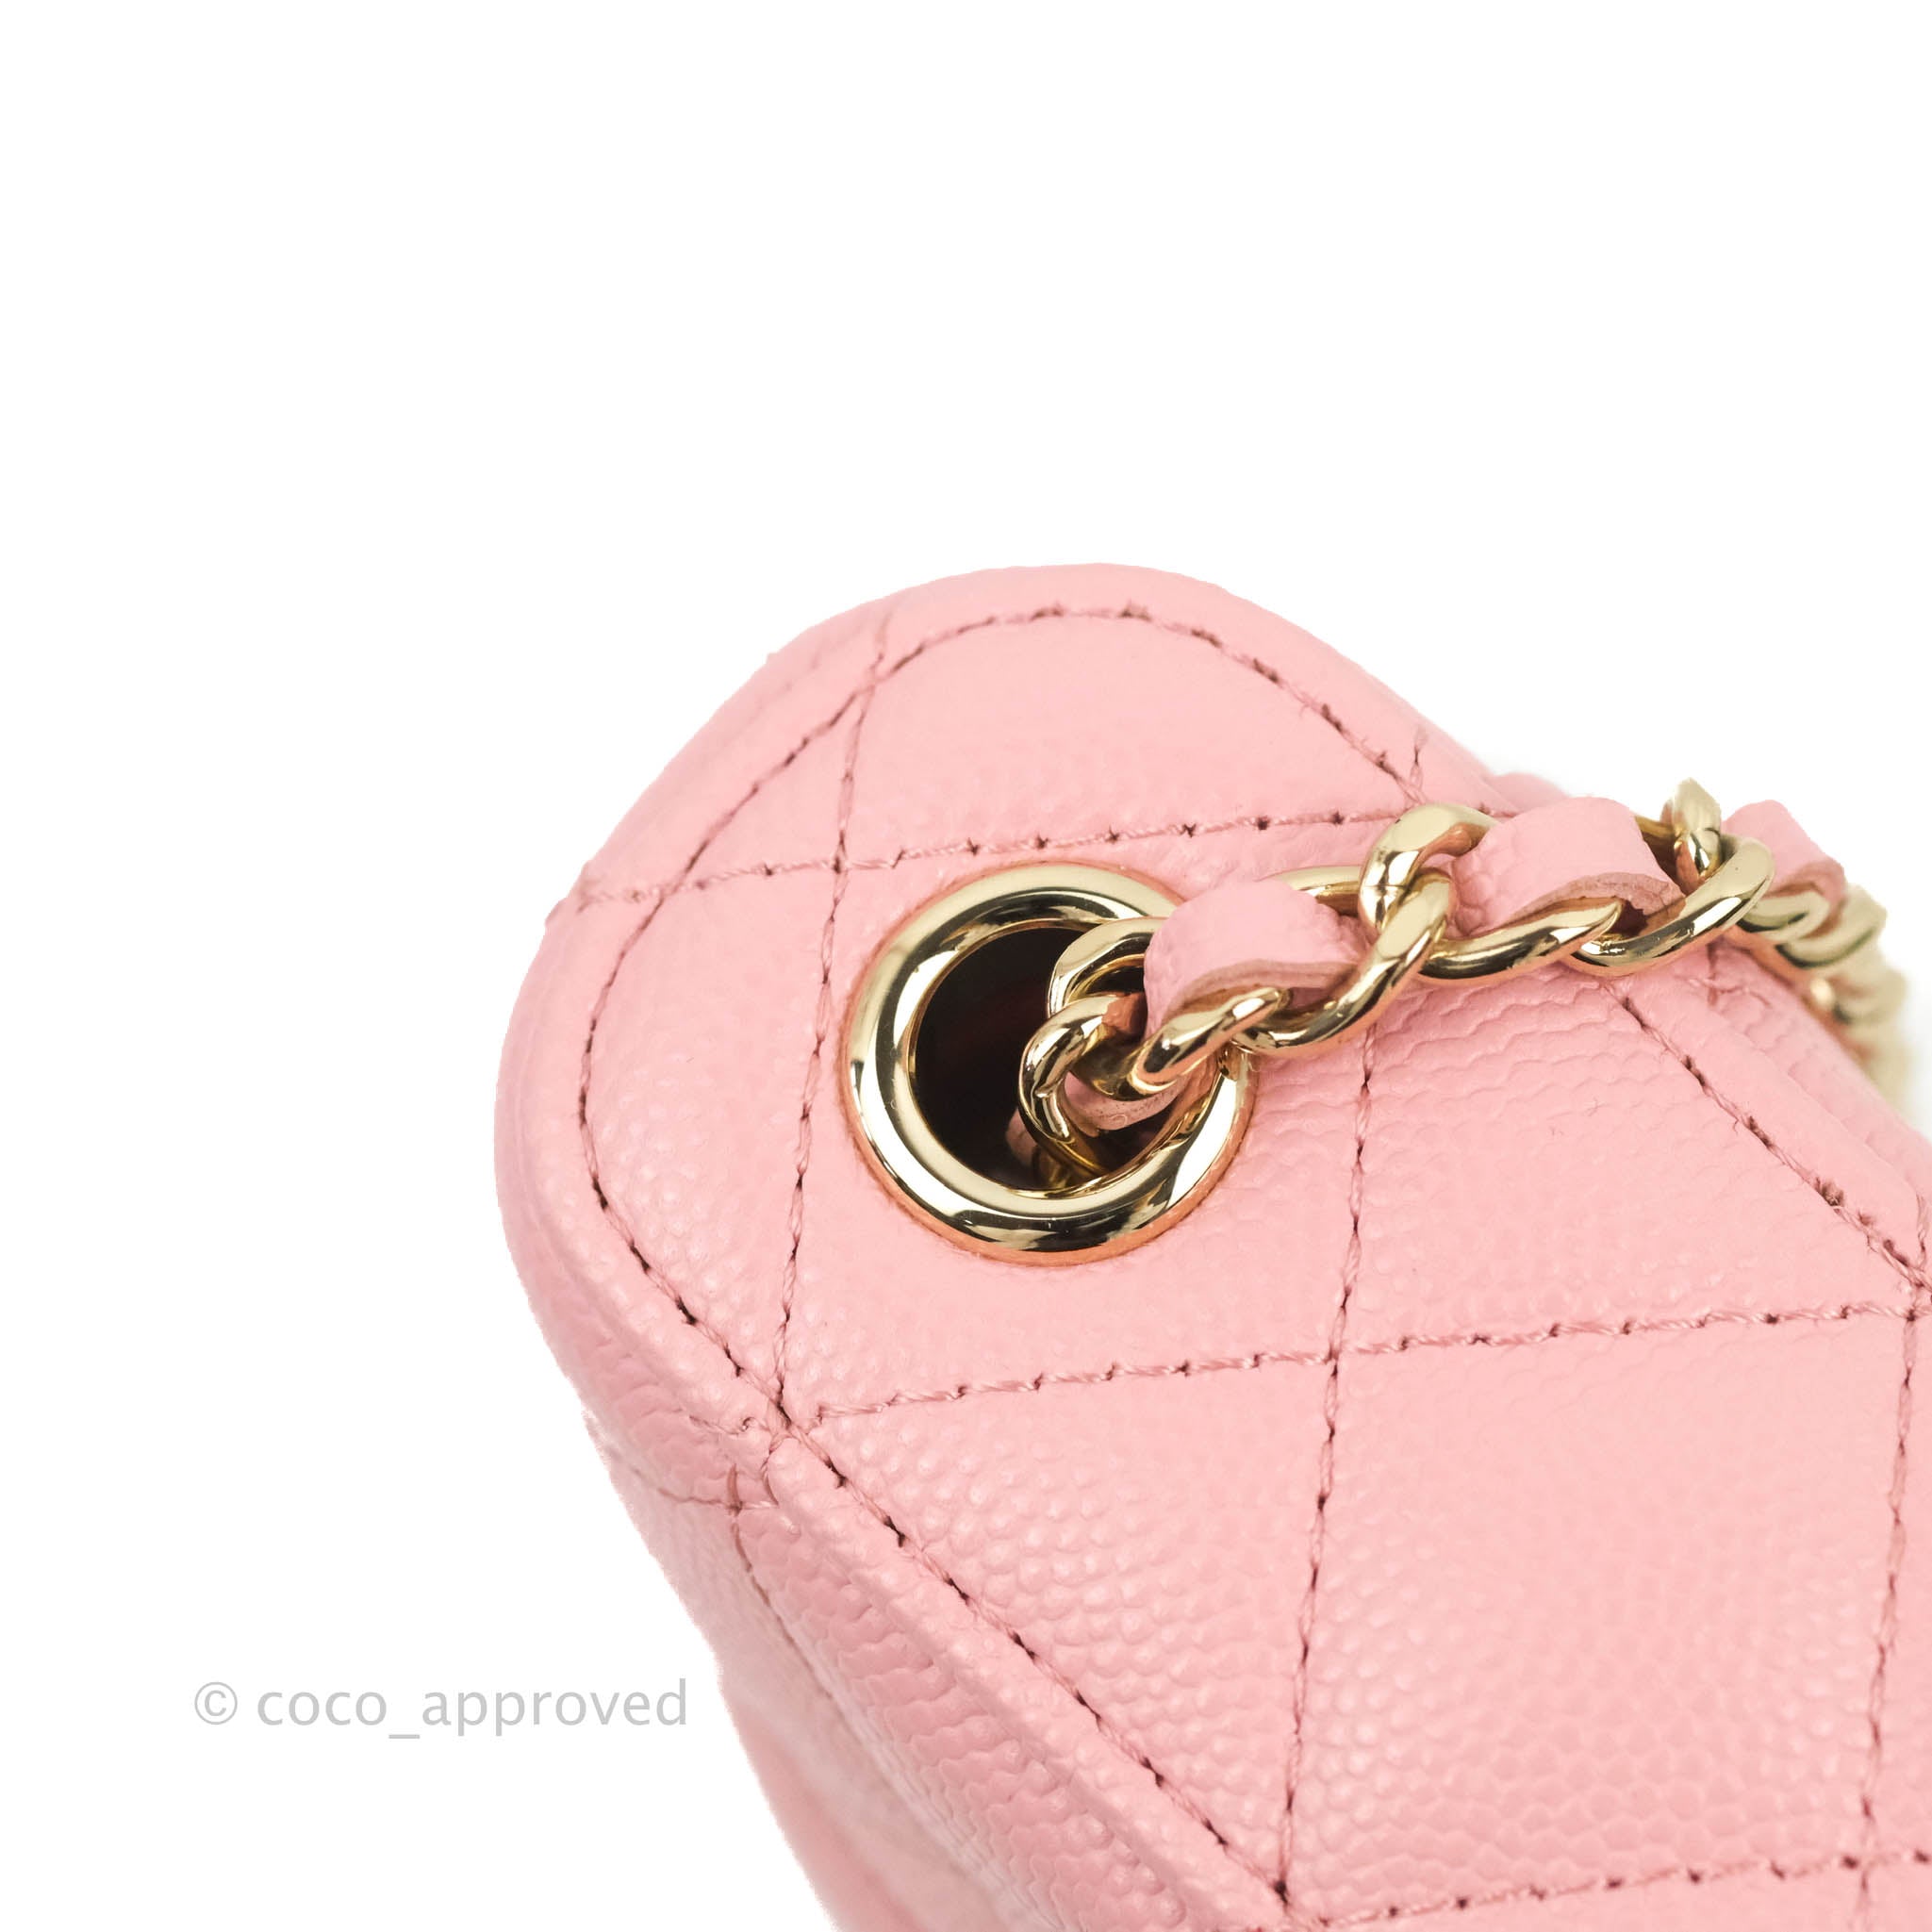 Chanel 2021 Reissue Phone Holder with Chain - Pink Crossbody Bags